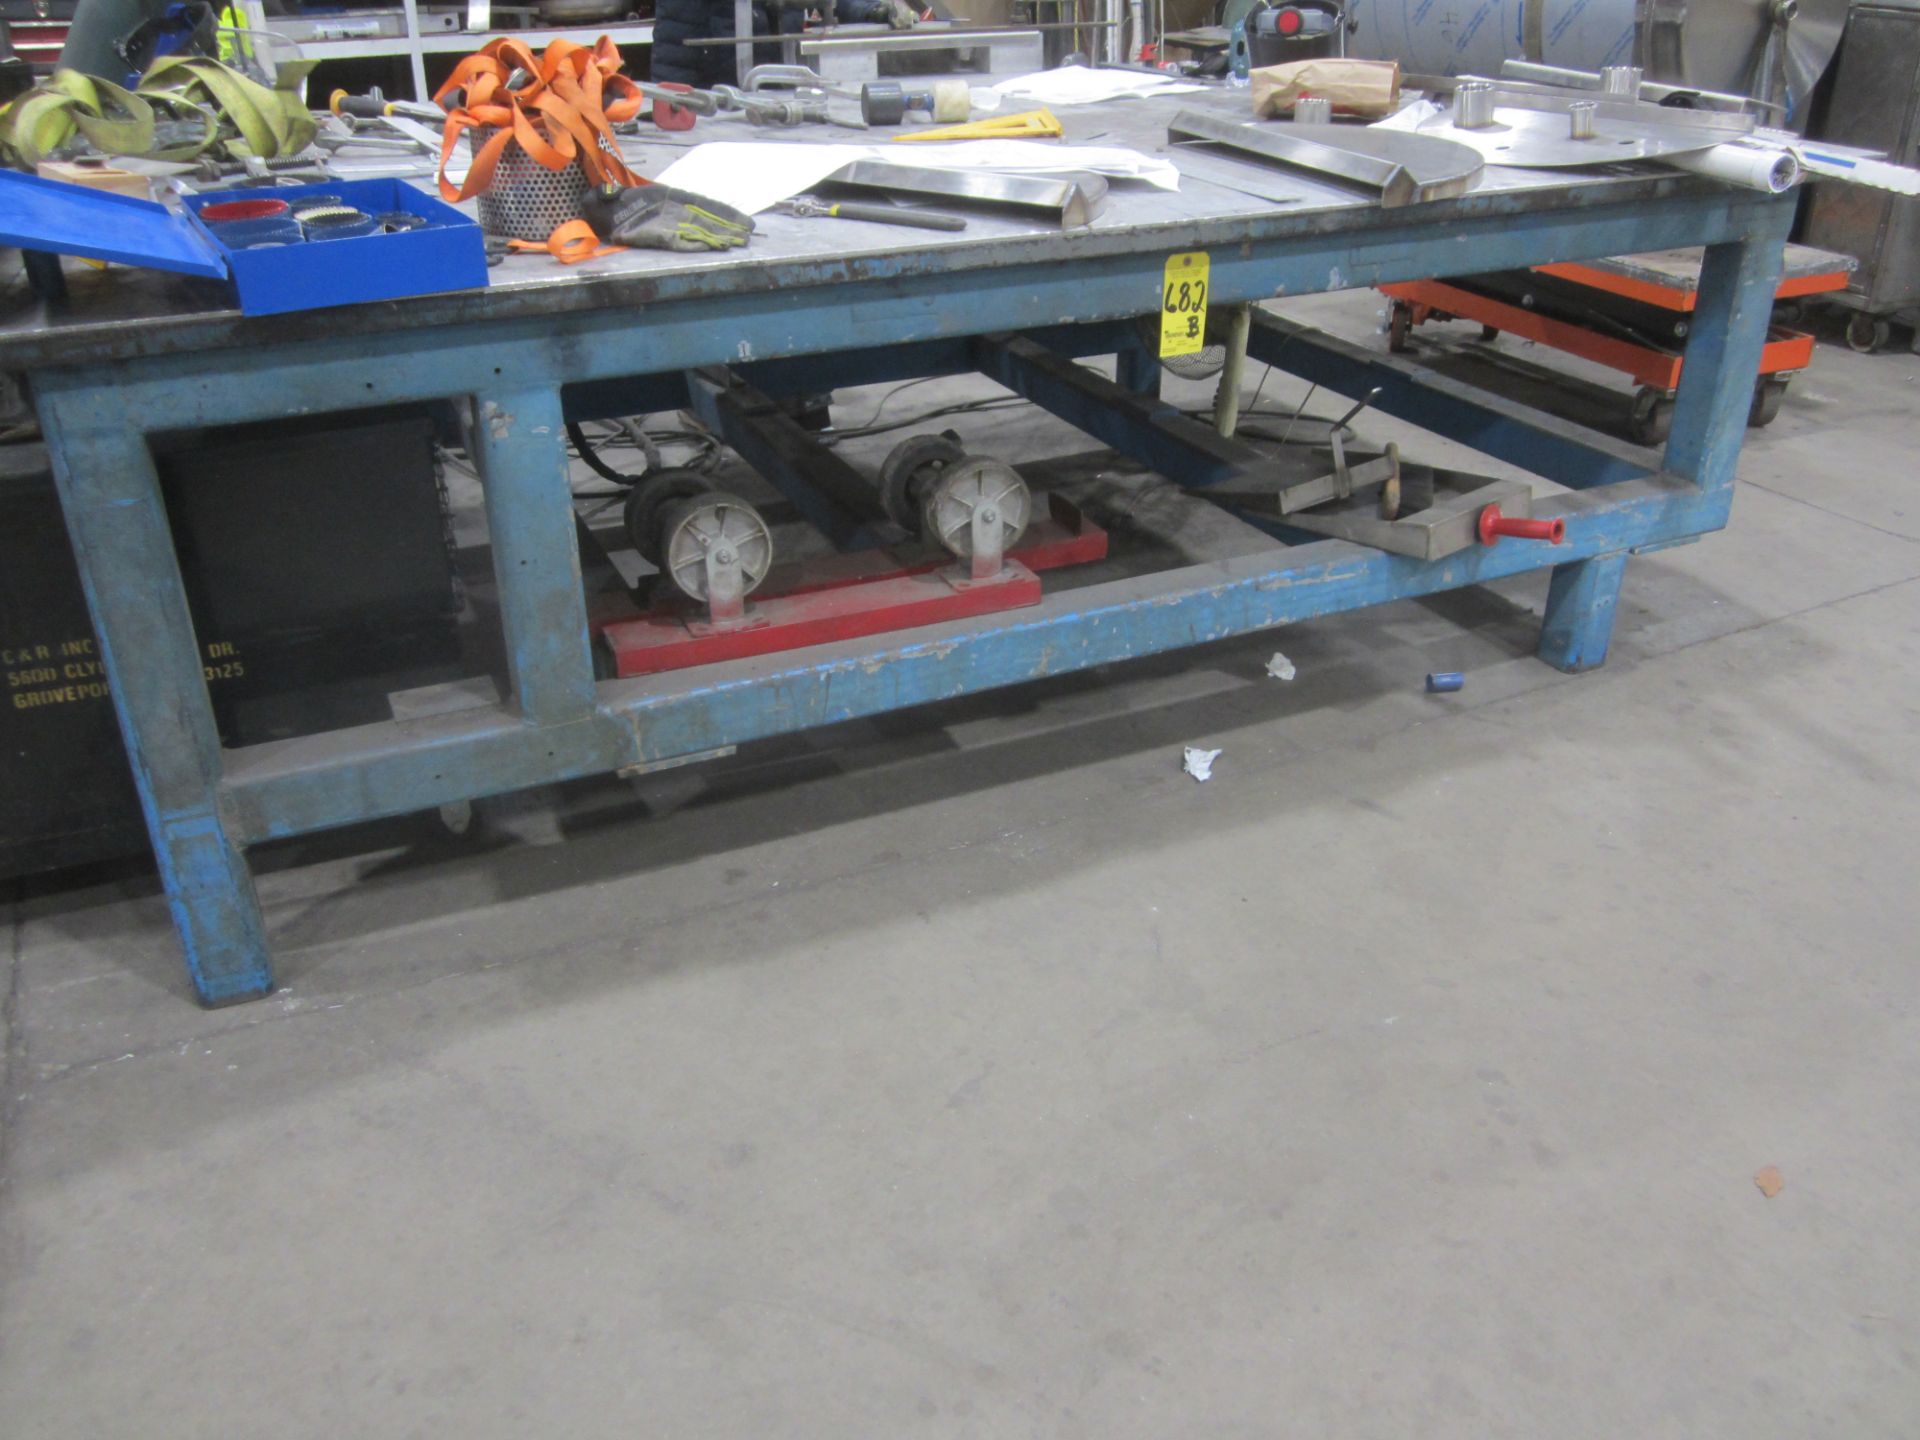 Welding/Layout Table, 1" Steel Top with 1/4" Aluminum Top Plate, 72" X 120" X 36", No Contents